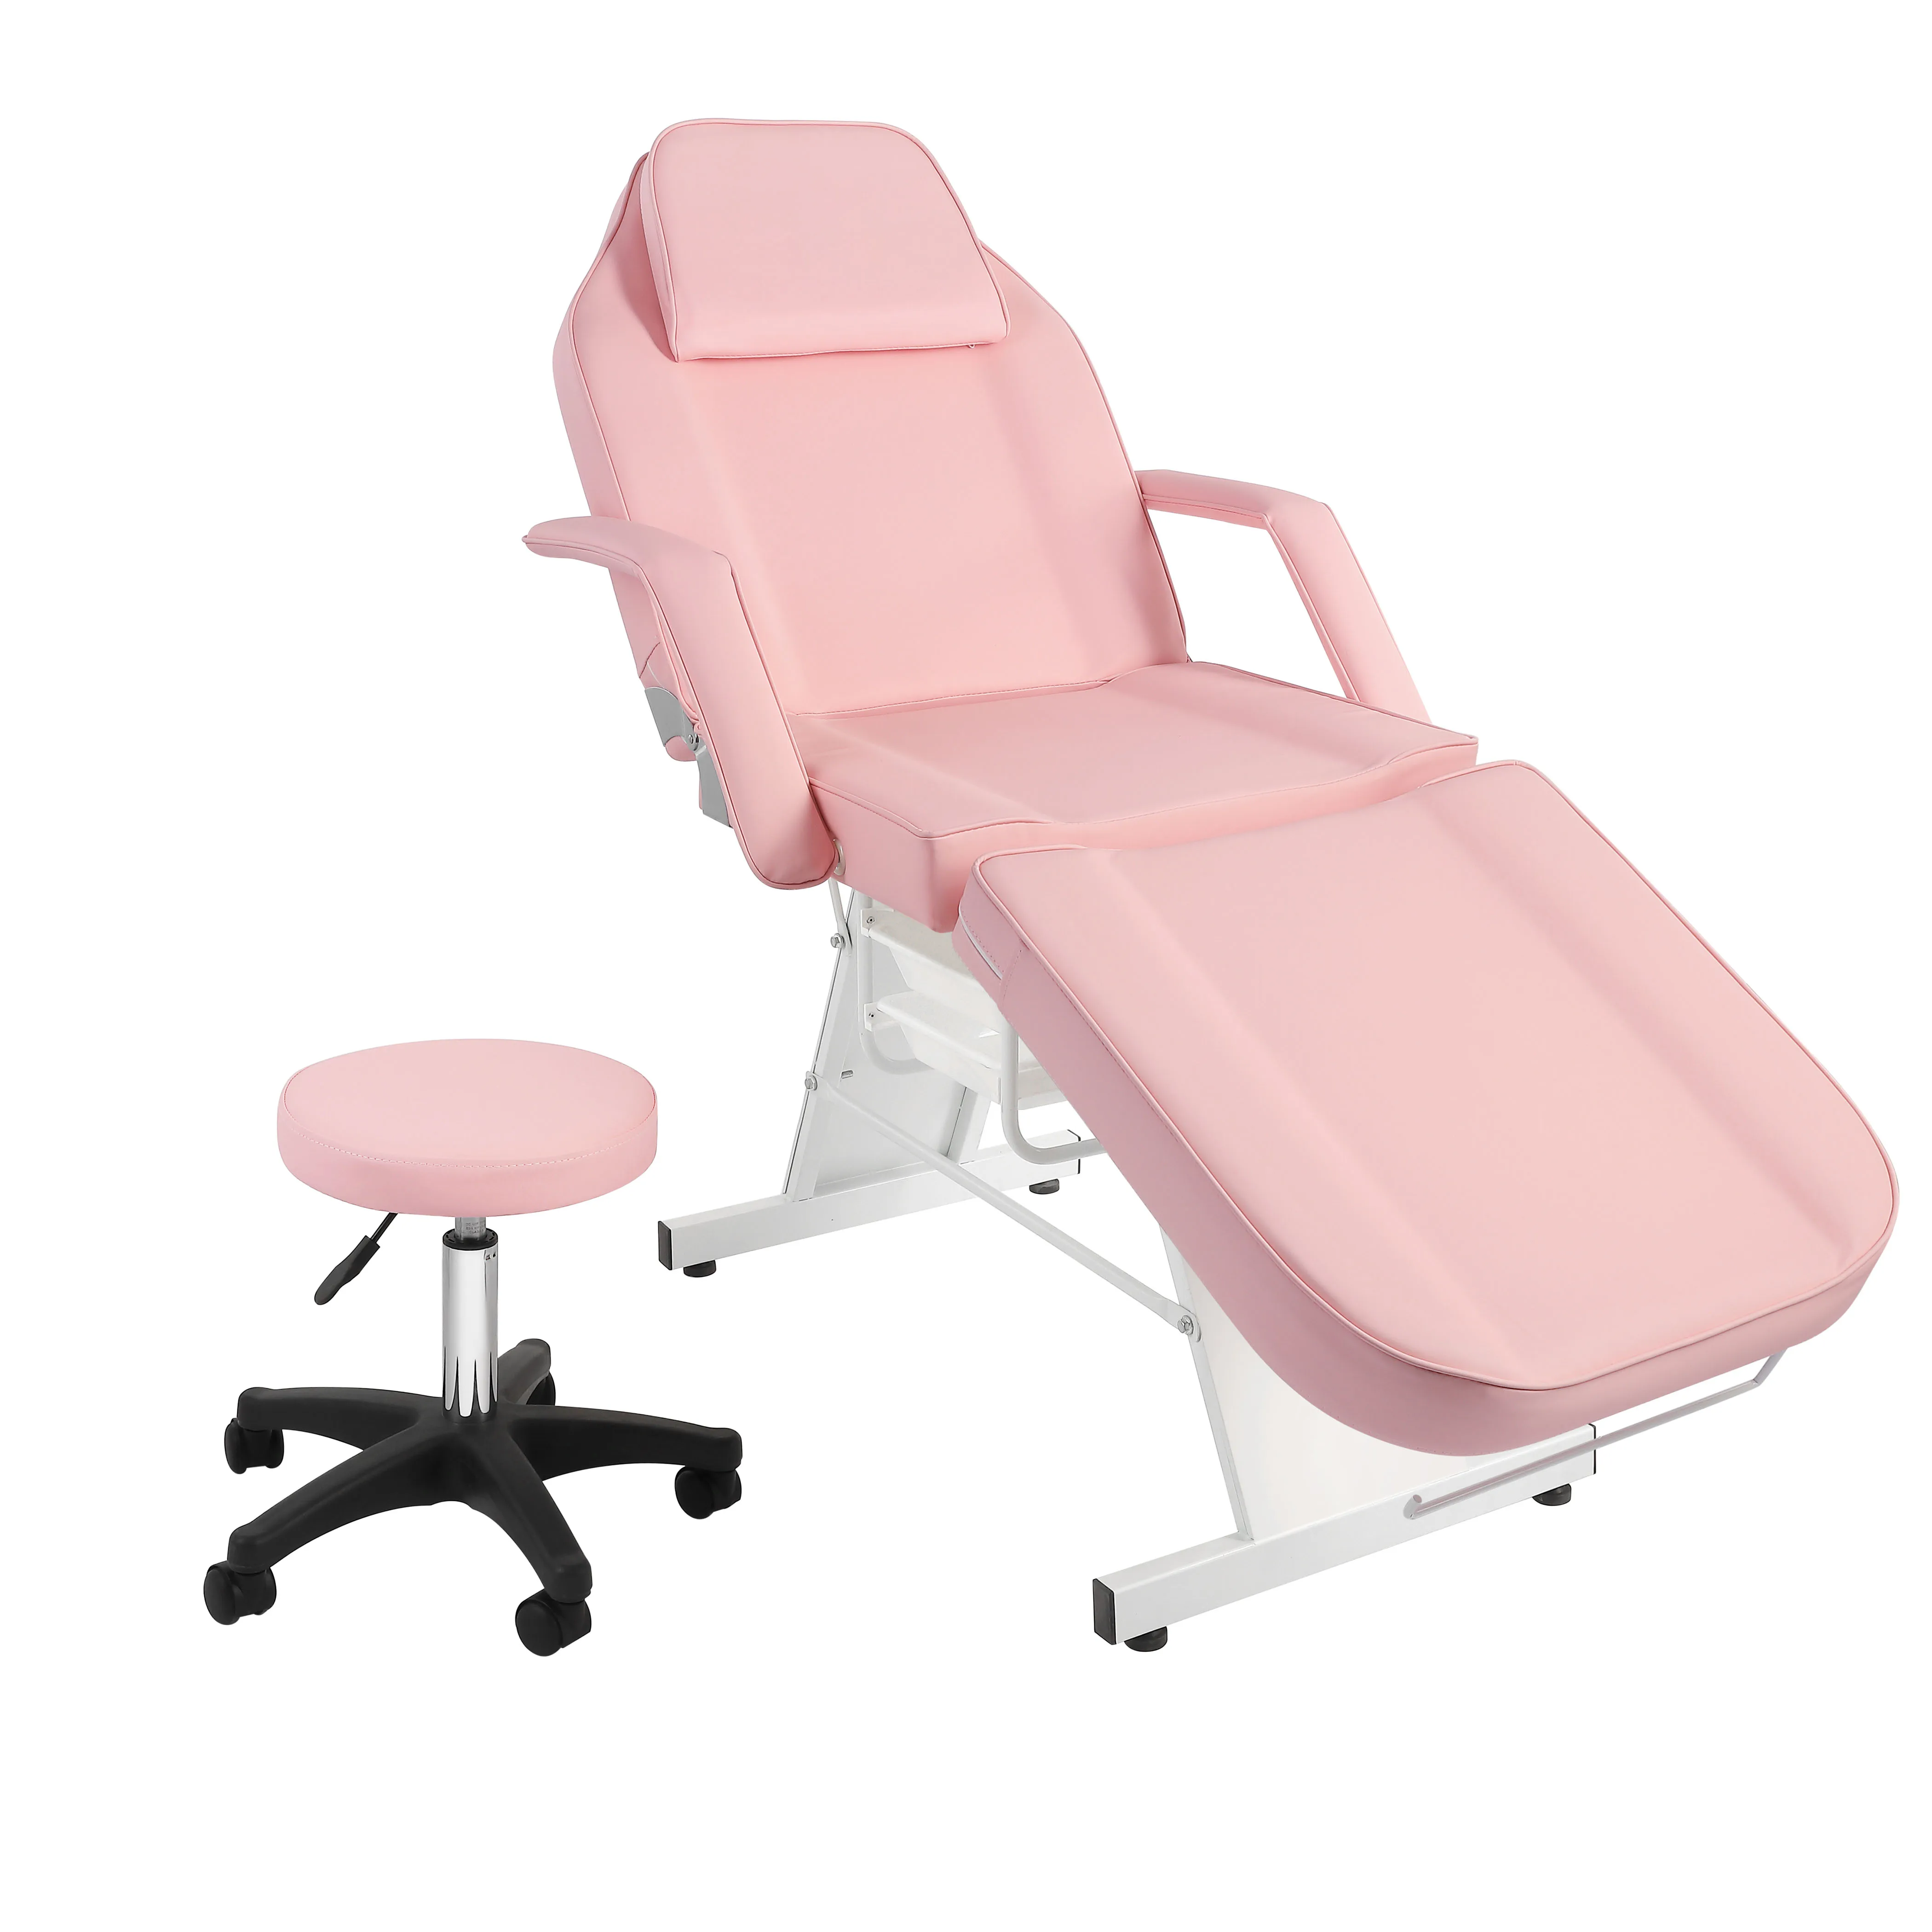 Pink Facial Bed Tattoo Chair Beauty Massage Chair With Two Drawers Mauifacture Direct Sale (1600689483300)